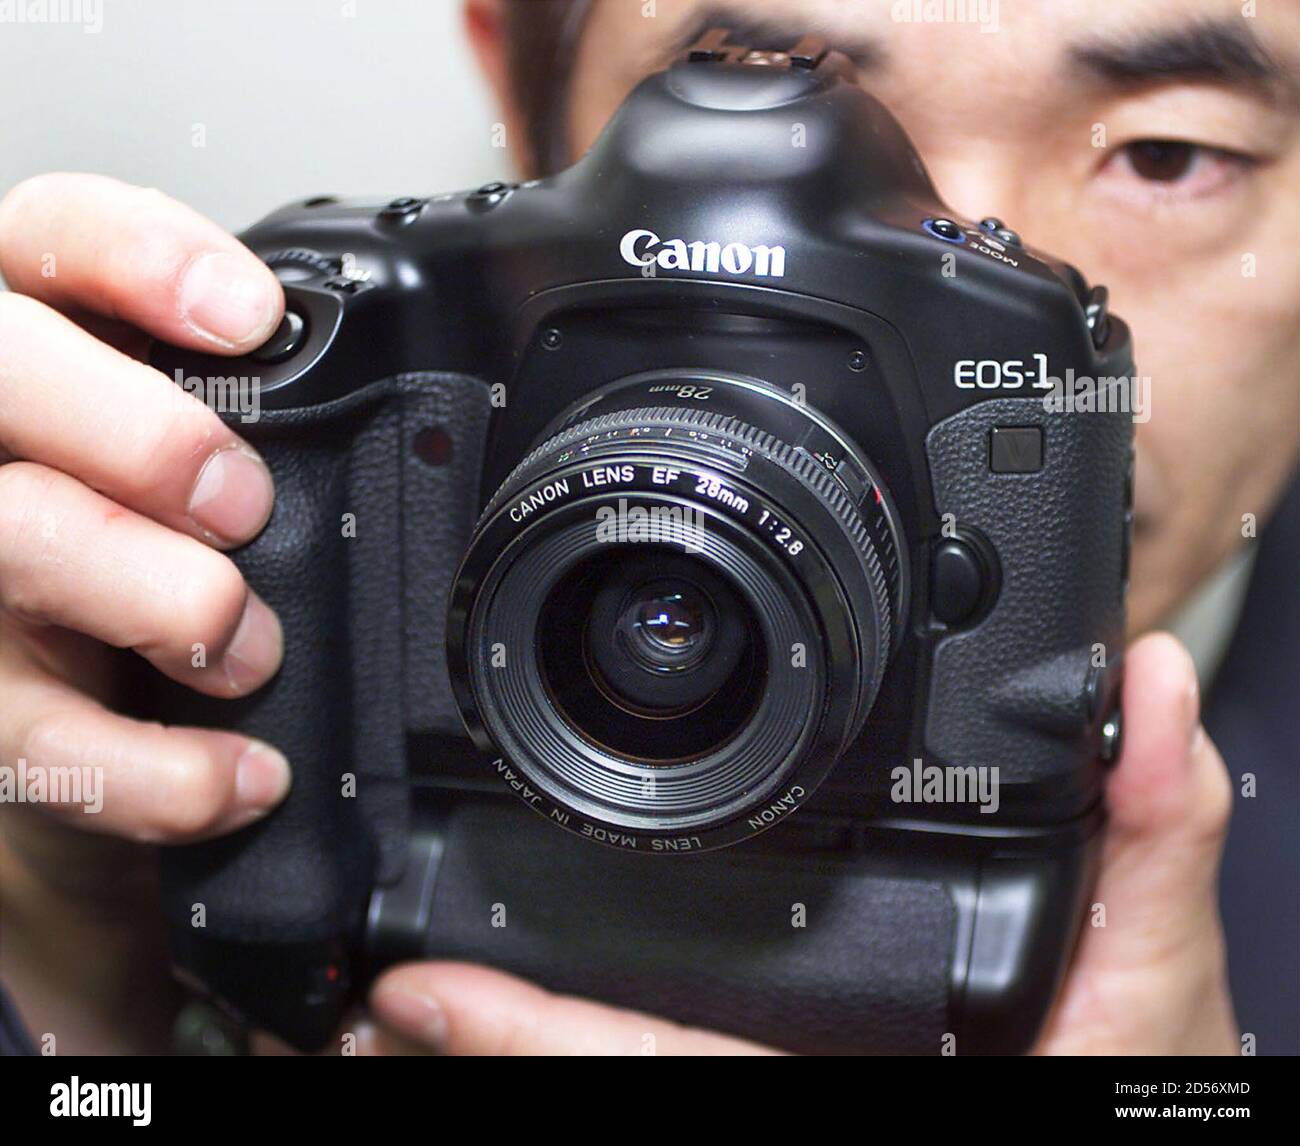 Canon Employee Yoshinobu Ohkawaguchi Holds The New Eos 1v Camera In Tokyo February 2 Canon Inc Introduced Its Flagship Professional Model Eos 1v Af Slr Camera Equipped With An Array Of State Of The Art Features Including